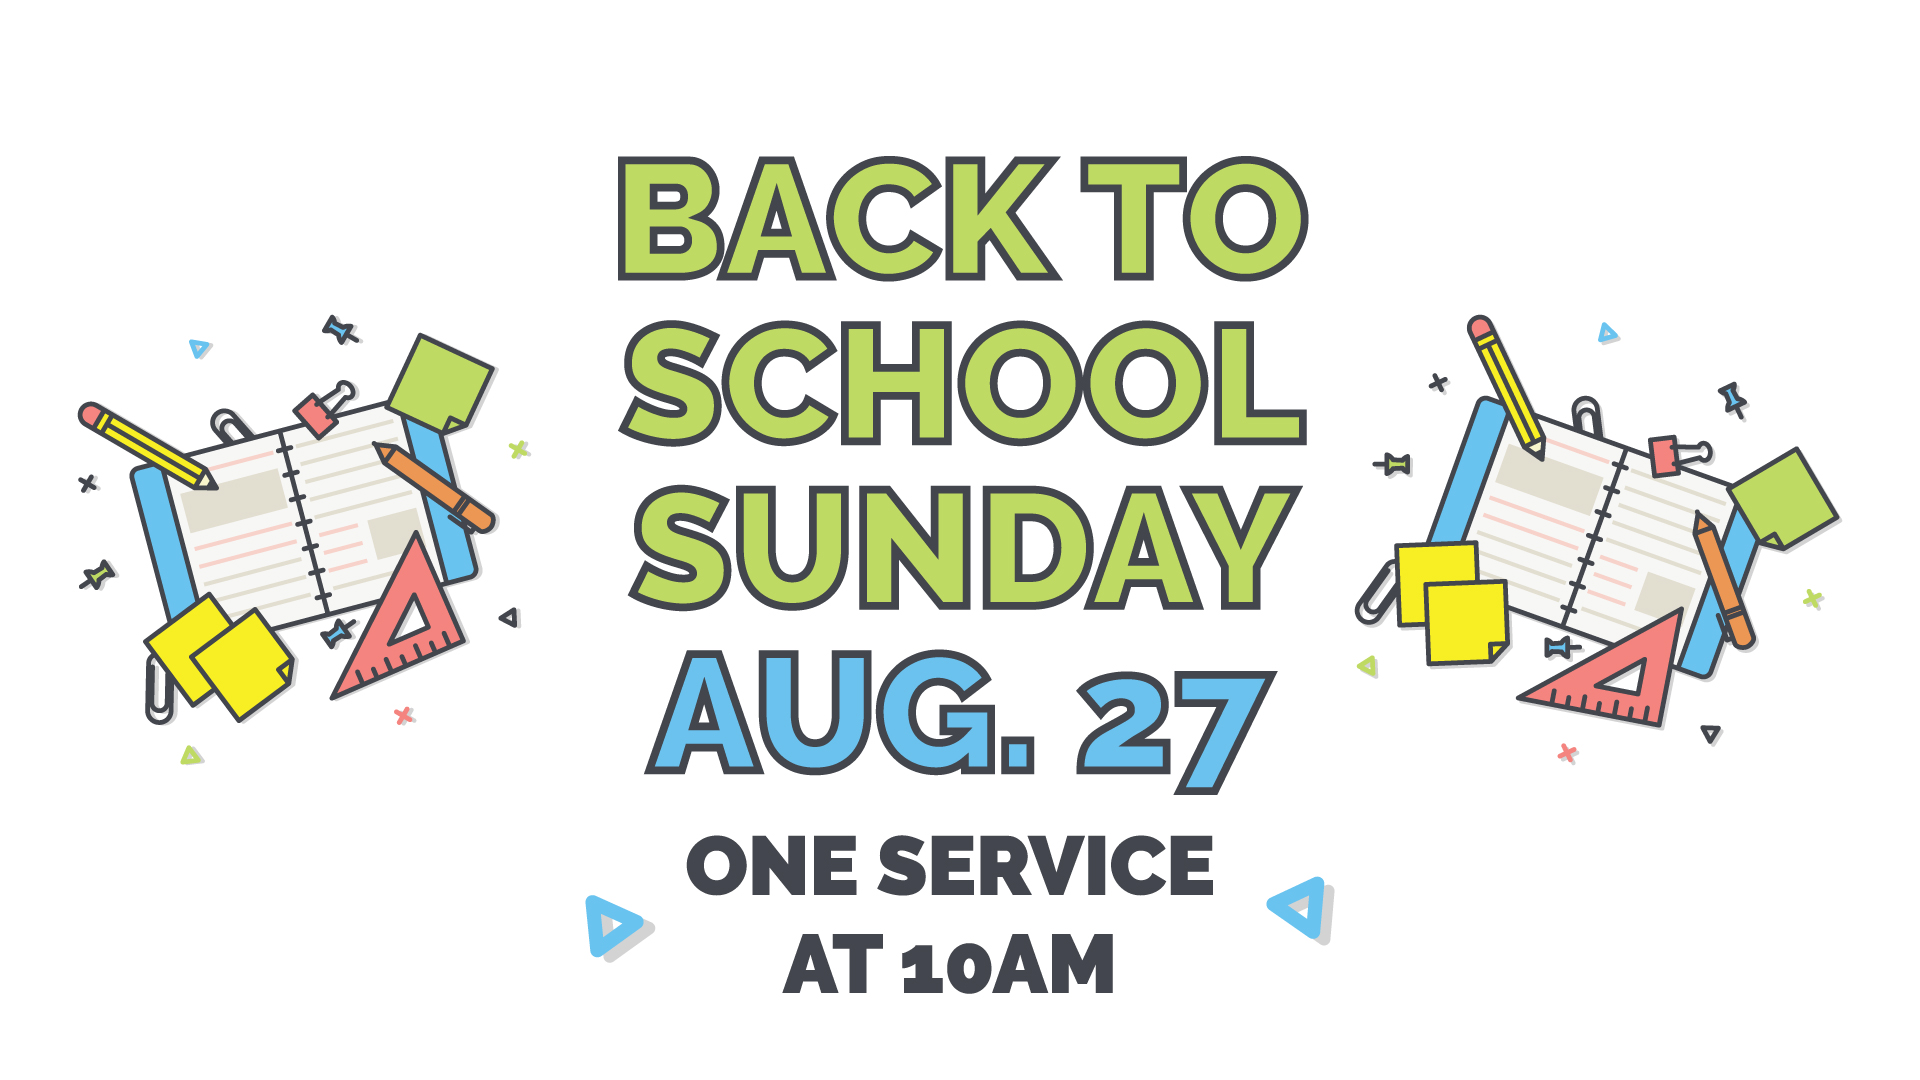 Back to School Sunday | August 27 | One Service at 10AM